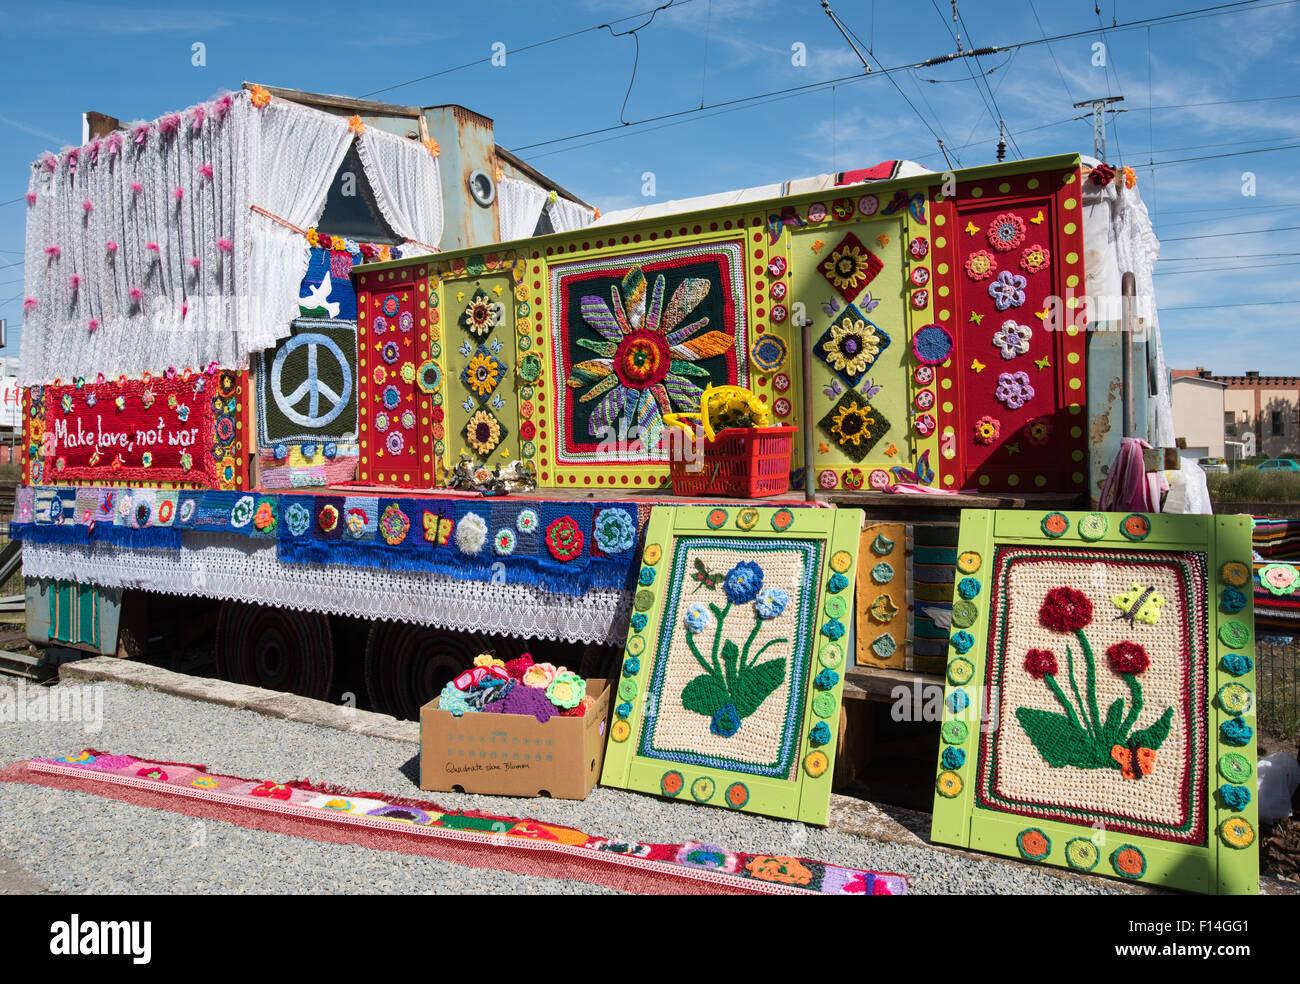 Peace activists Christa Senberg stands with an old diesel locomotive covered by a colourful knitted garment at a hand car depot in Zossen, Germany, 26 August 2015. Held for the second time at this location is the movement 'Knitting for Peace'. After a huge success in 2013, where many dedicated knitting and crochet fans from all over Germany and neighbouring countries turned the diesel locomotives into symbols for piece, there is now a sequel event.  Under the slogan 'Make love, not war' Visitors and friends of small trains have been invited to submit their colourful knitwear and crochet via so Stock Photo